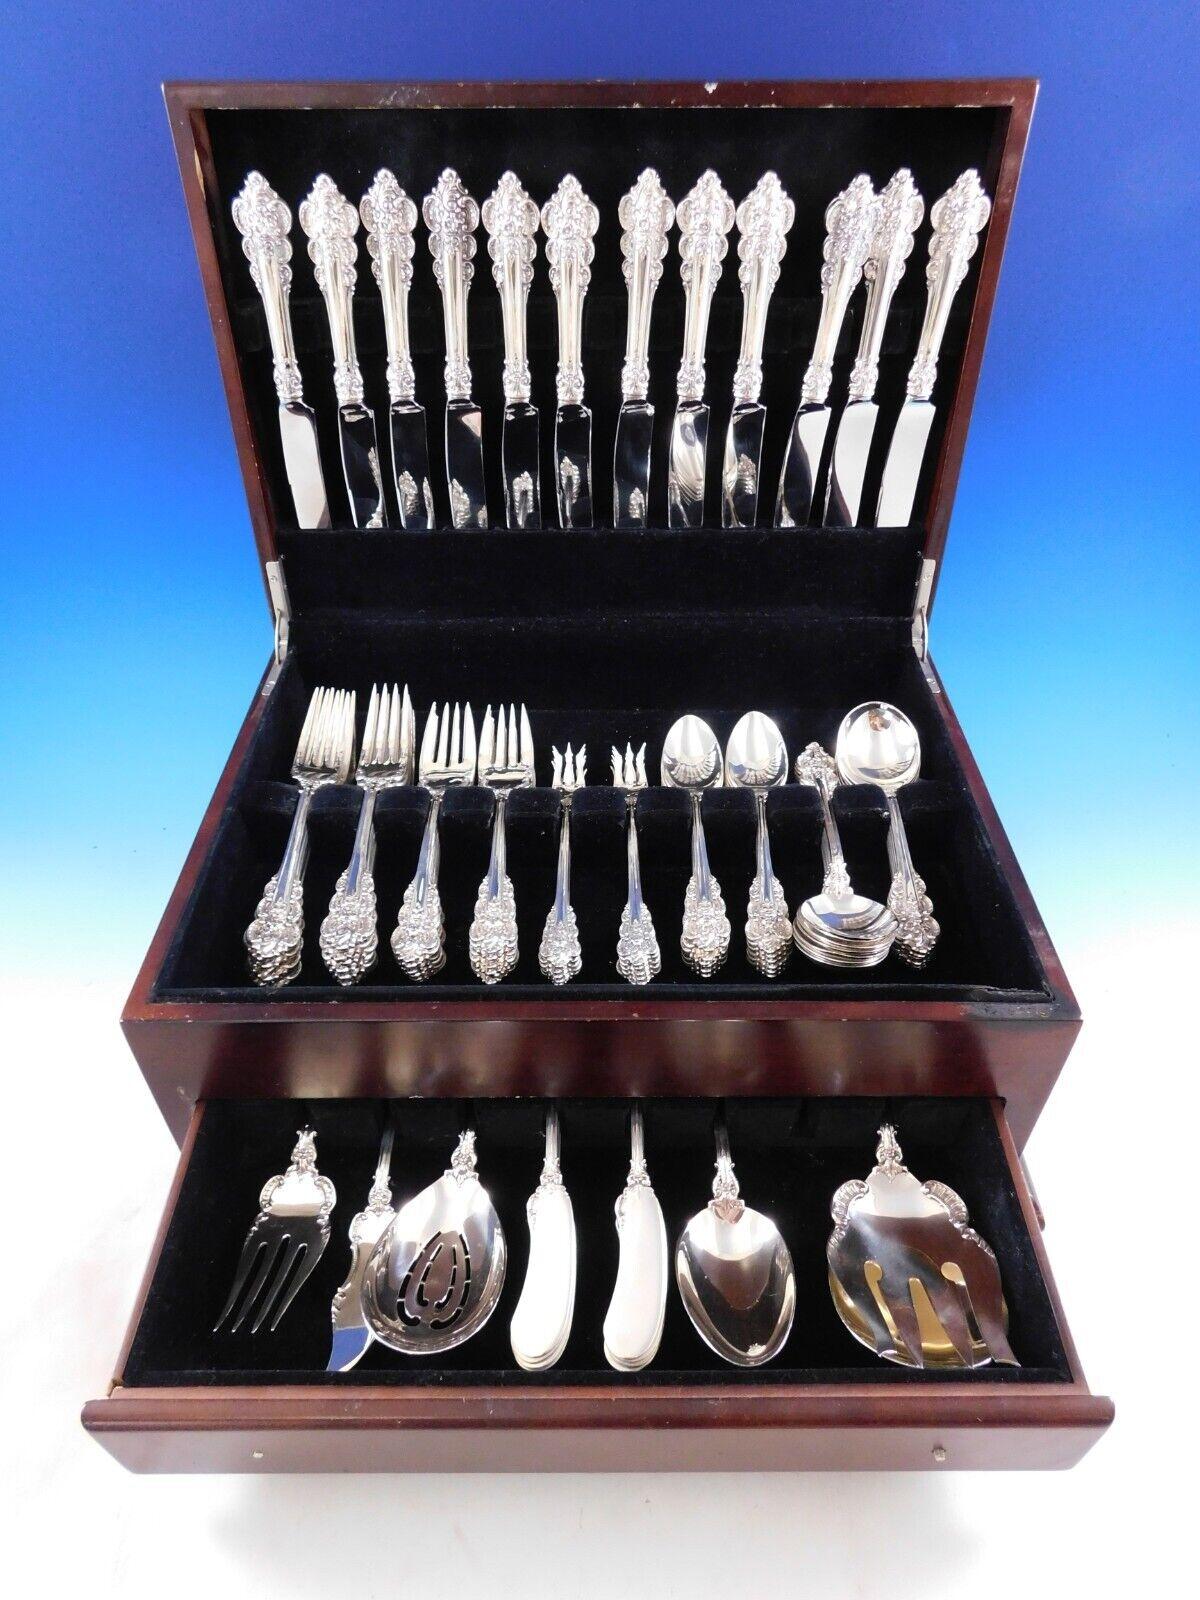 Botticelli by Frank Whiting Sterling Silver Flatware set, 91 pieces. This set includes:

12 Knives, 9 1/4